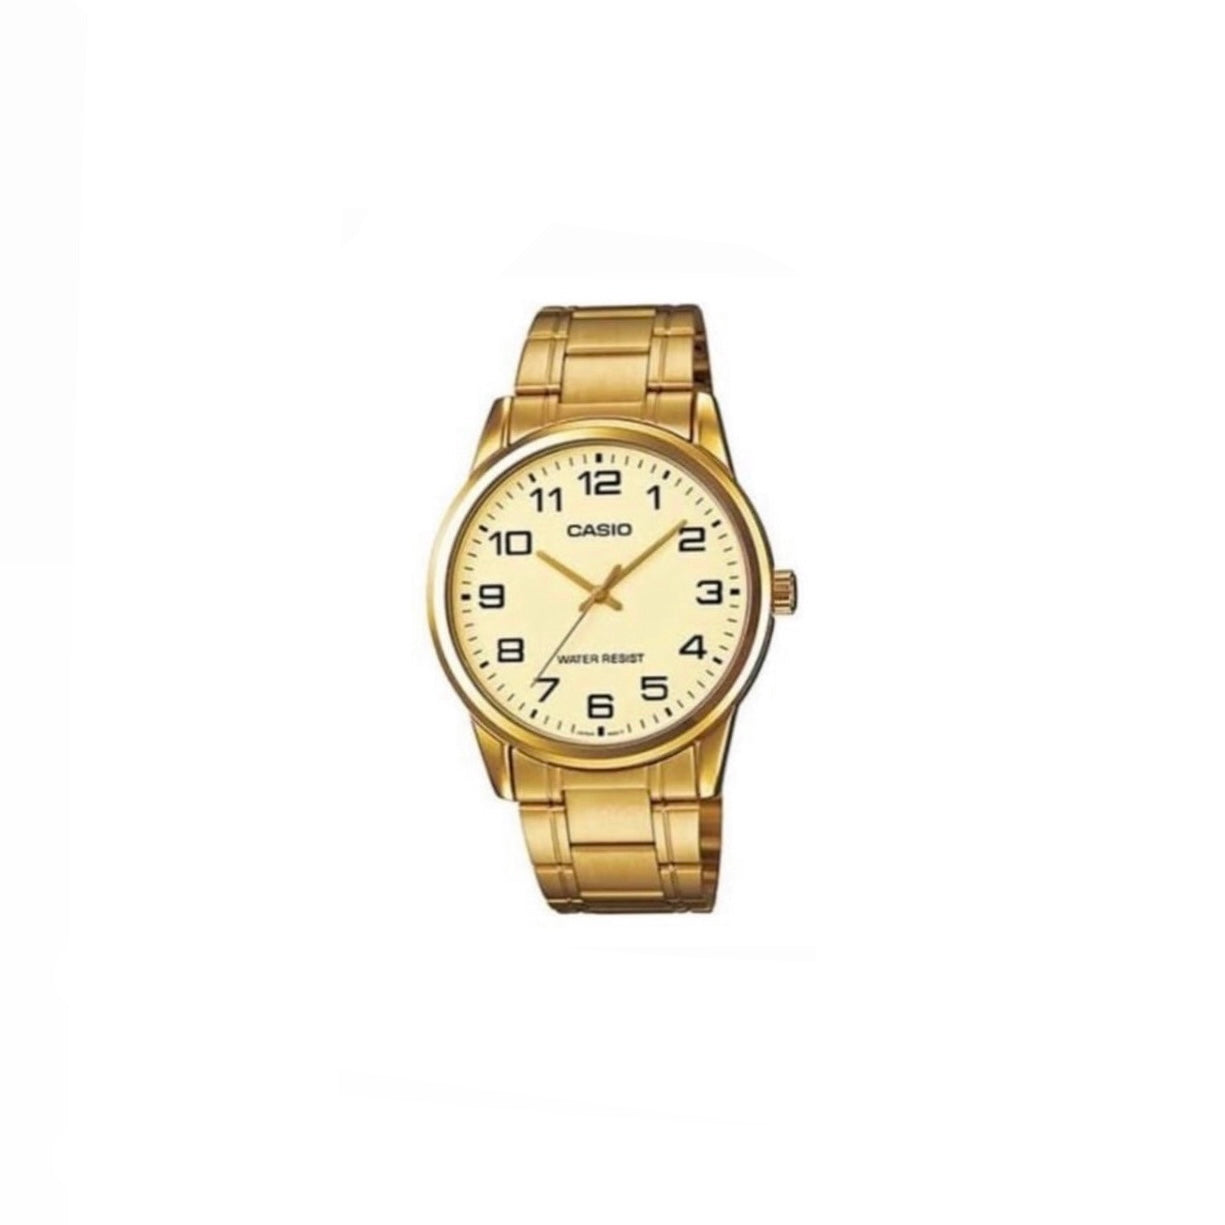 Casio Men's Gold-Tone Stainless-Steel Quartz Watch with Gold Dial (9363)